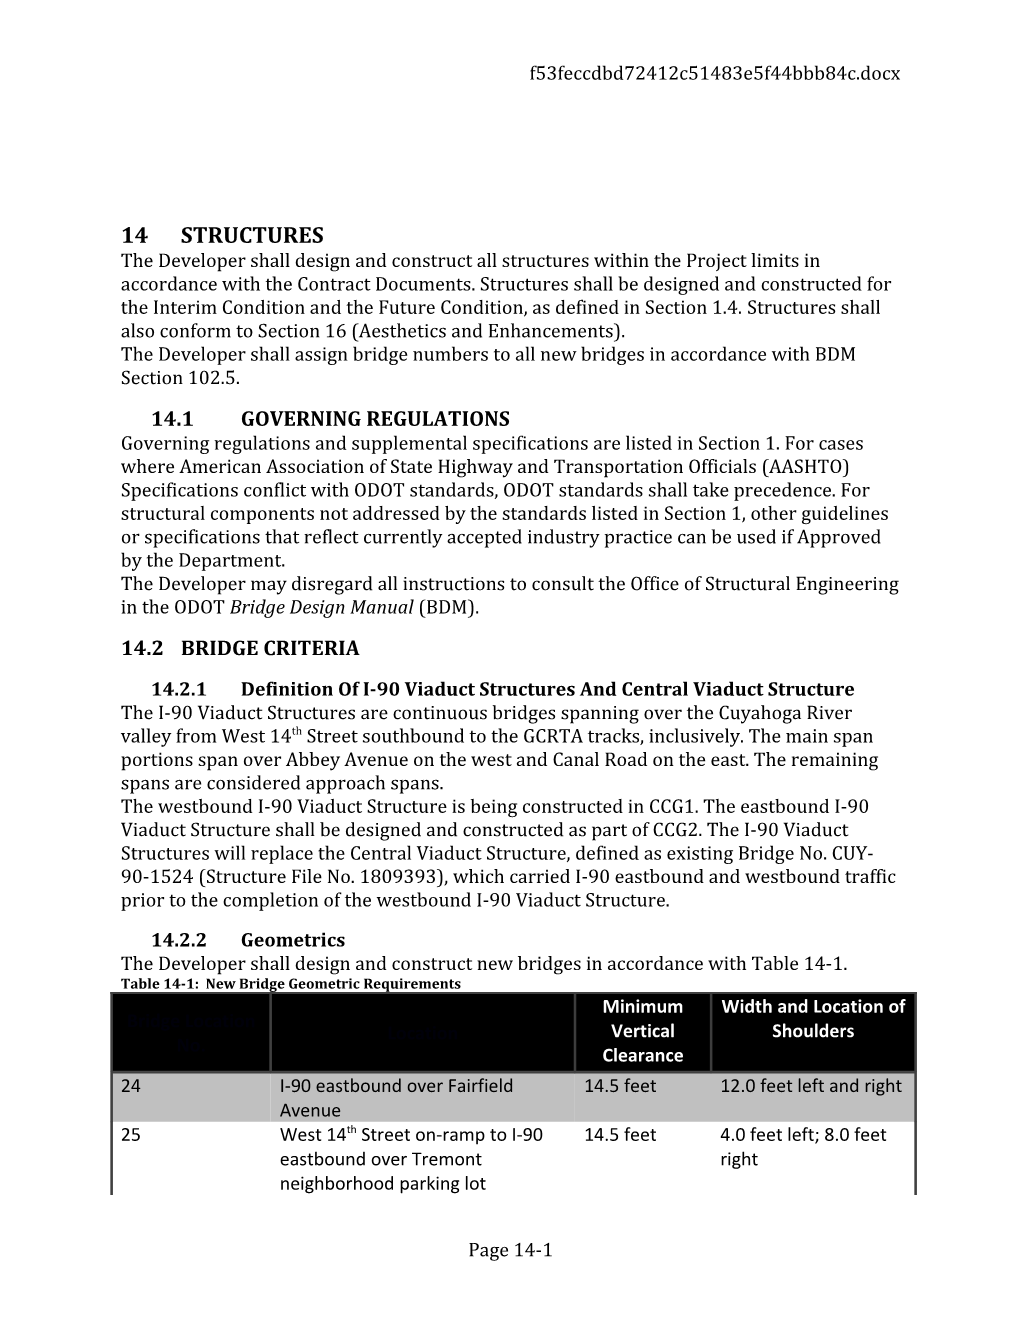 CCG2 Project Scope Section 14 Structures IR Draft